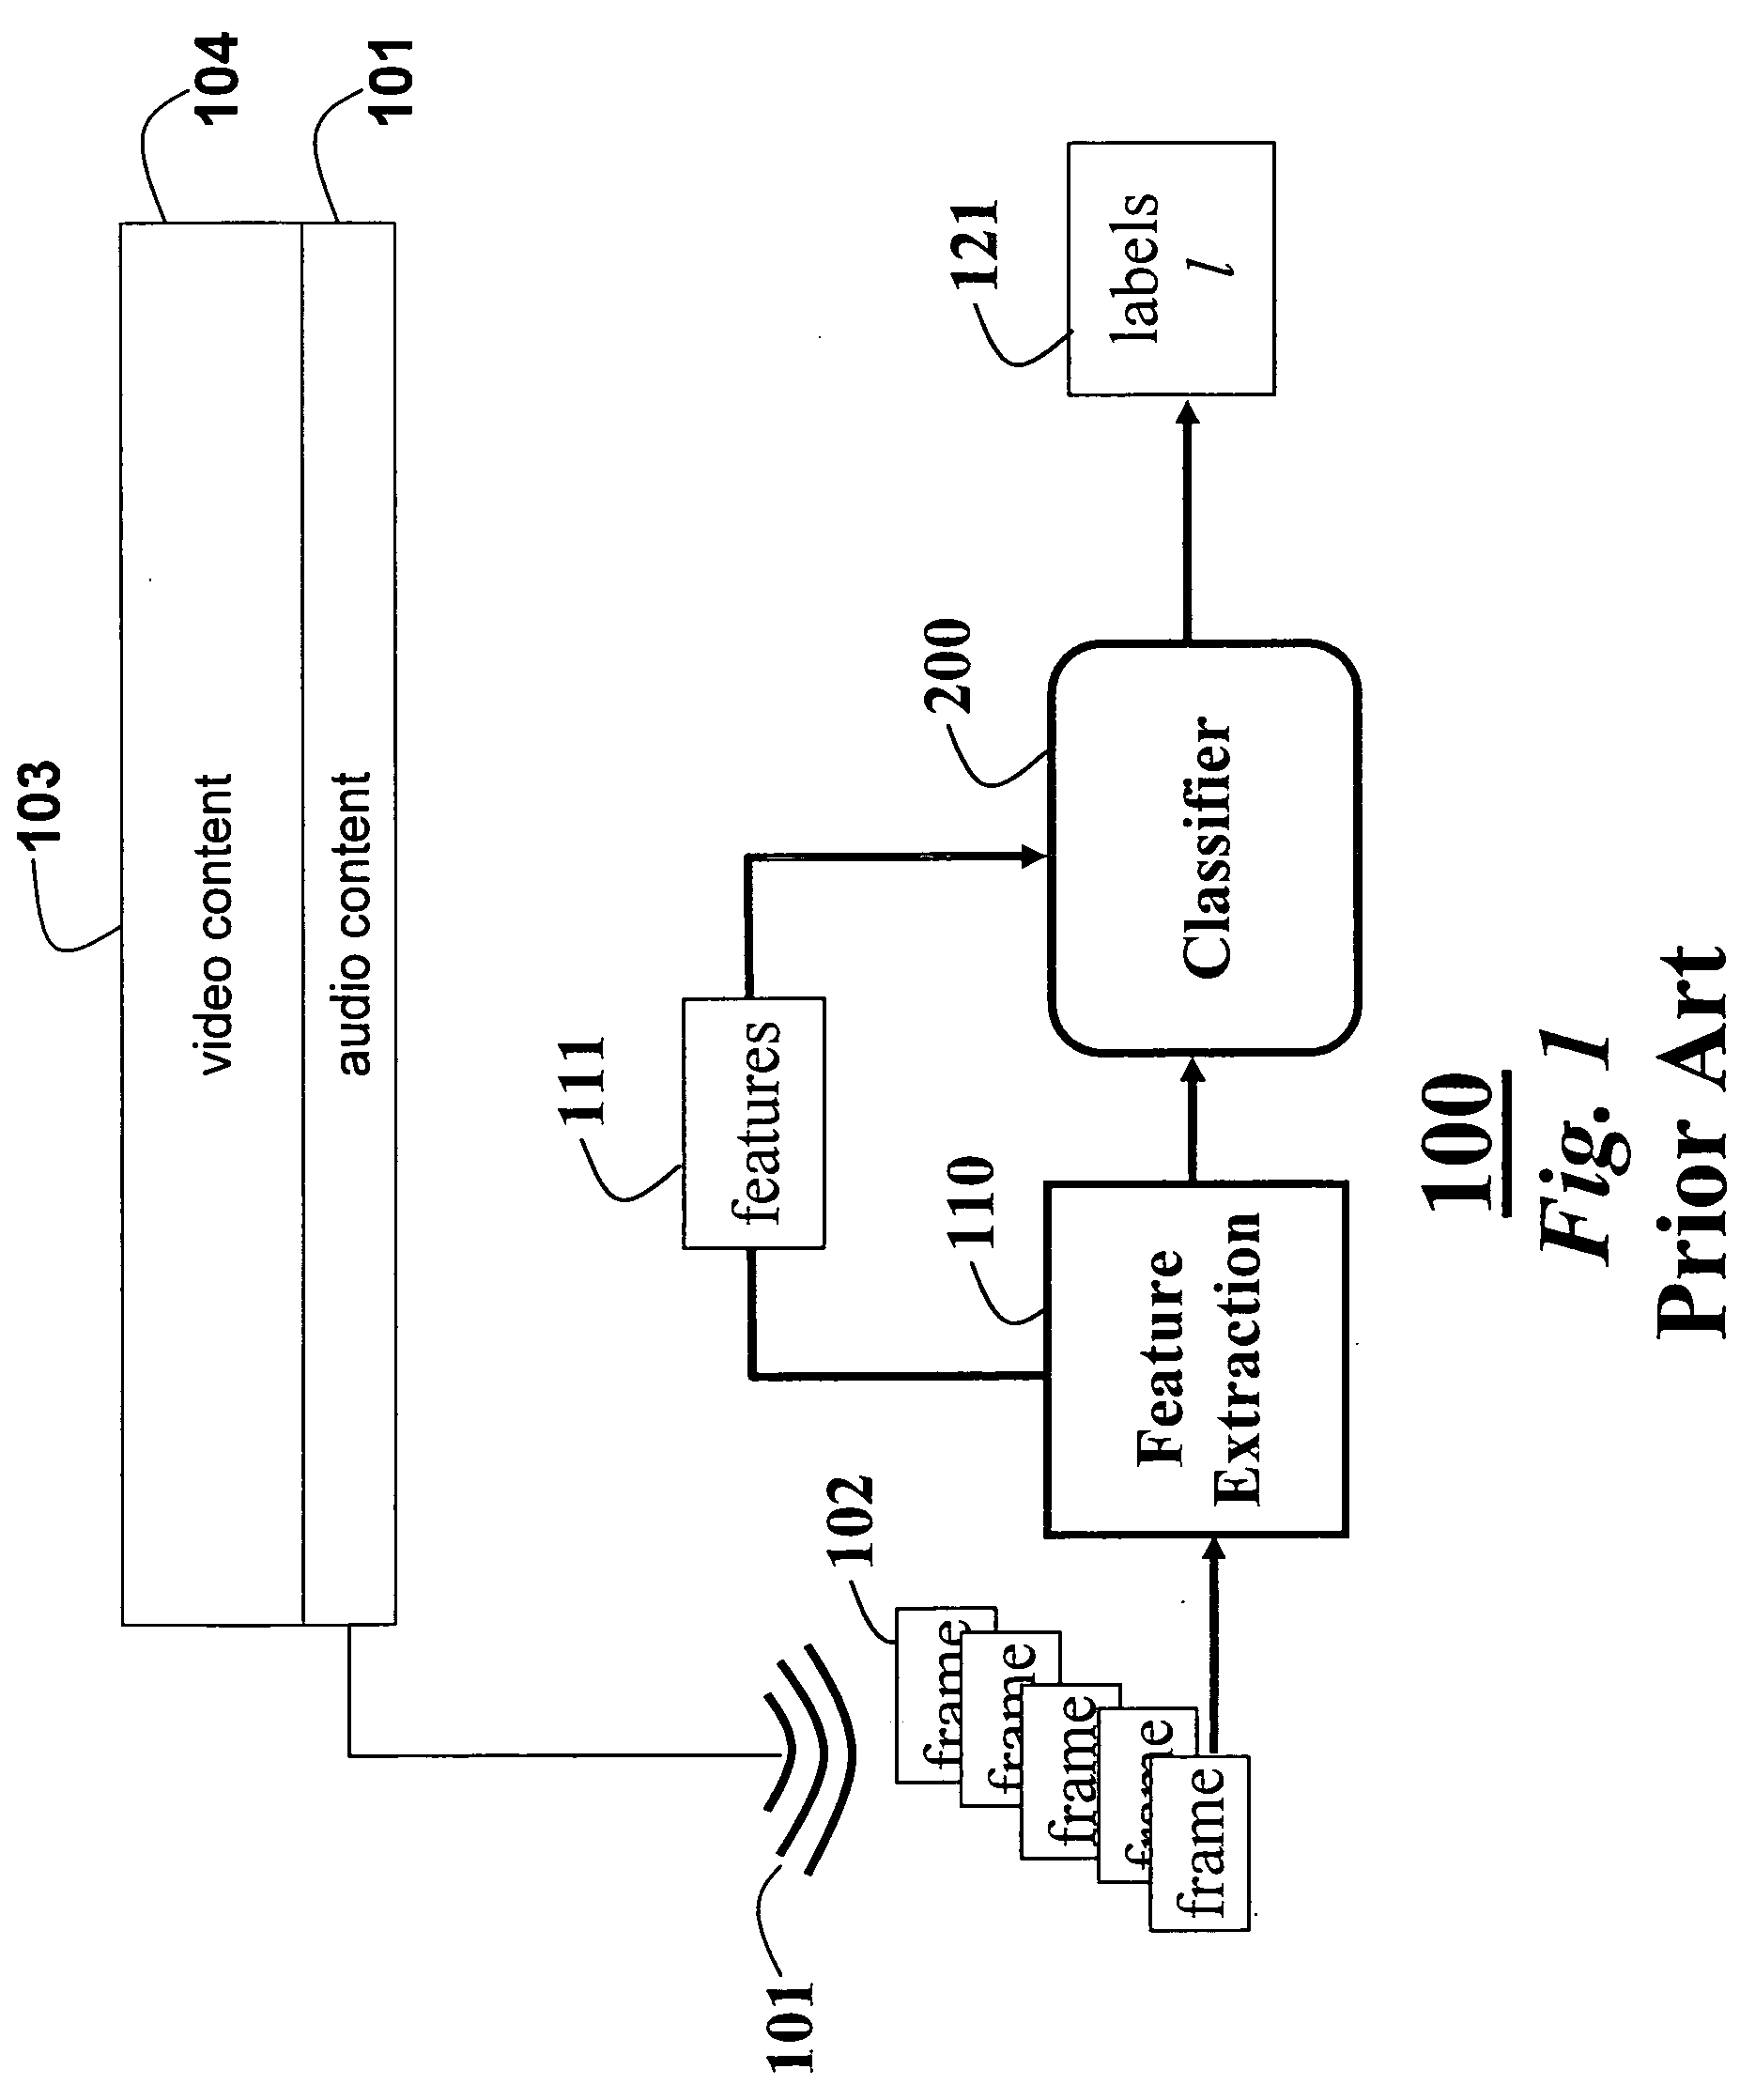 Method and system for video segmentation